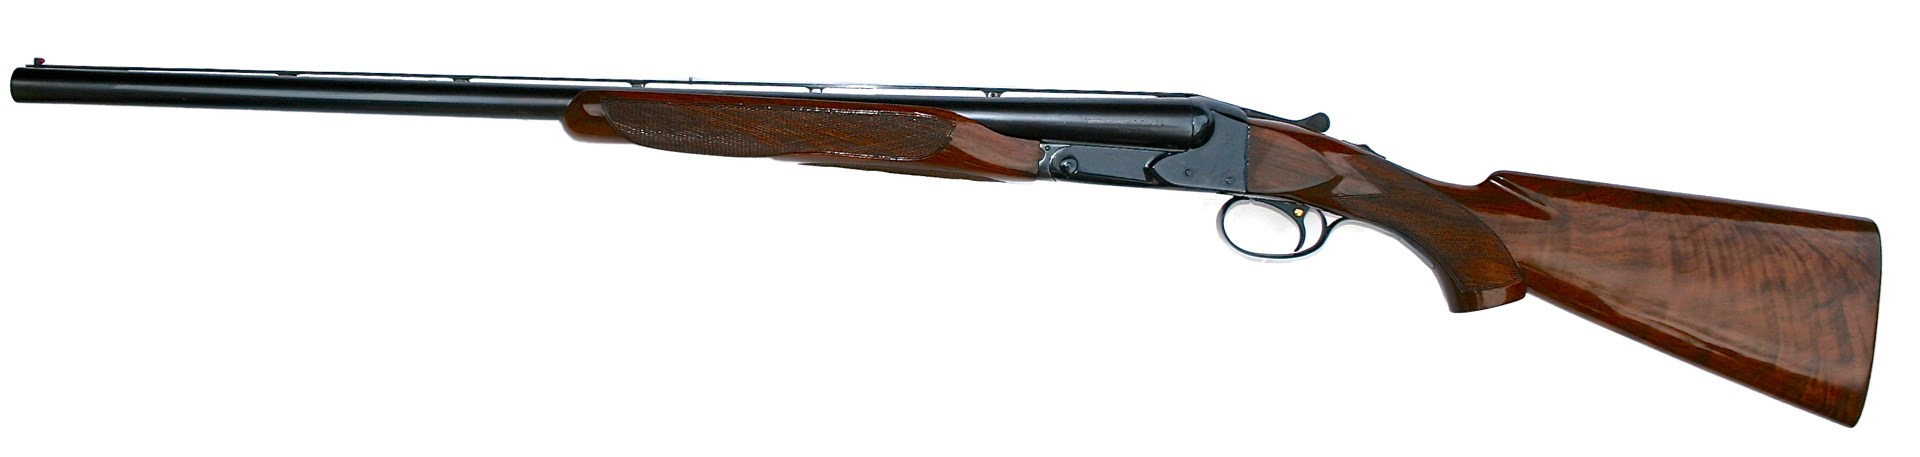 The author’s Winchester Skeet Model 21, with 26” barrels and ventilated rib, was shipped from the factory on Dec. 12, 1946.